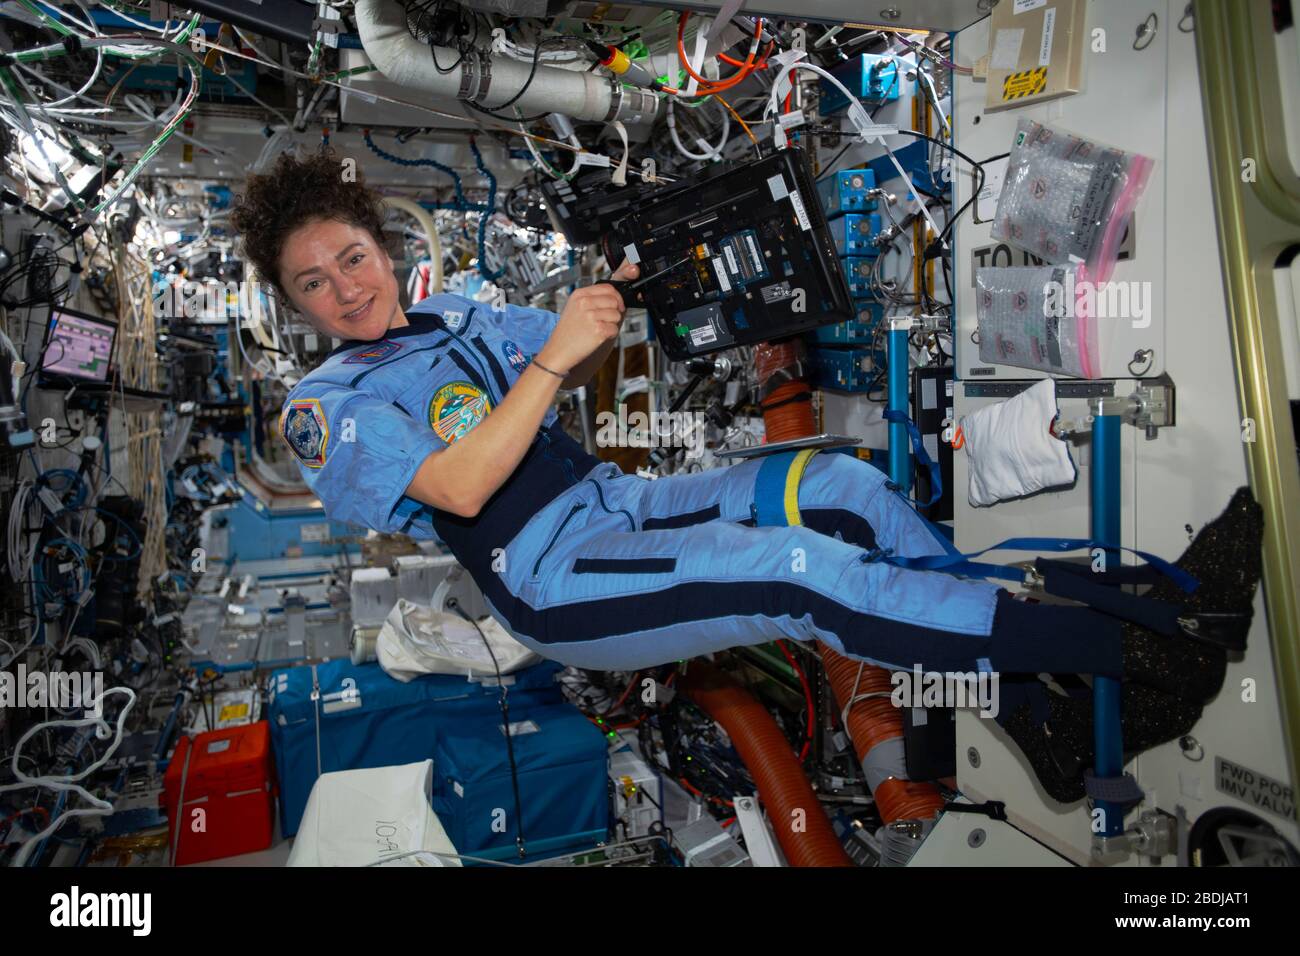 ISS - 31 March 2020 - NASA astronaut and Expedition 62 Flight Engineer Jessica Meir is pictured working on laptop computer maintenance aboard the Inte Stock Photo